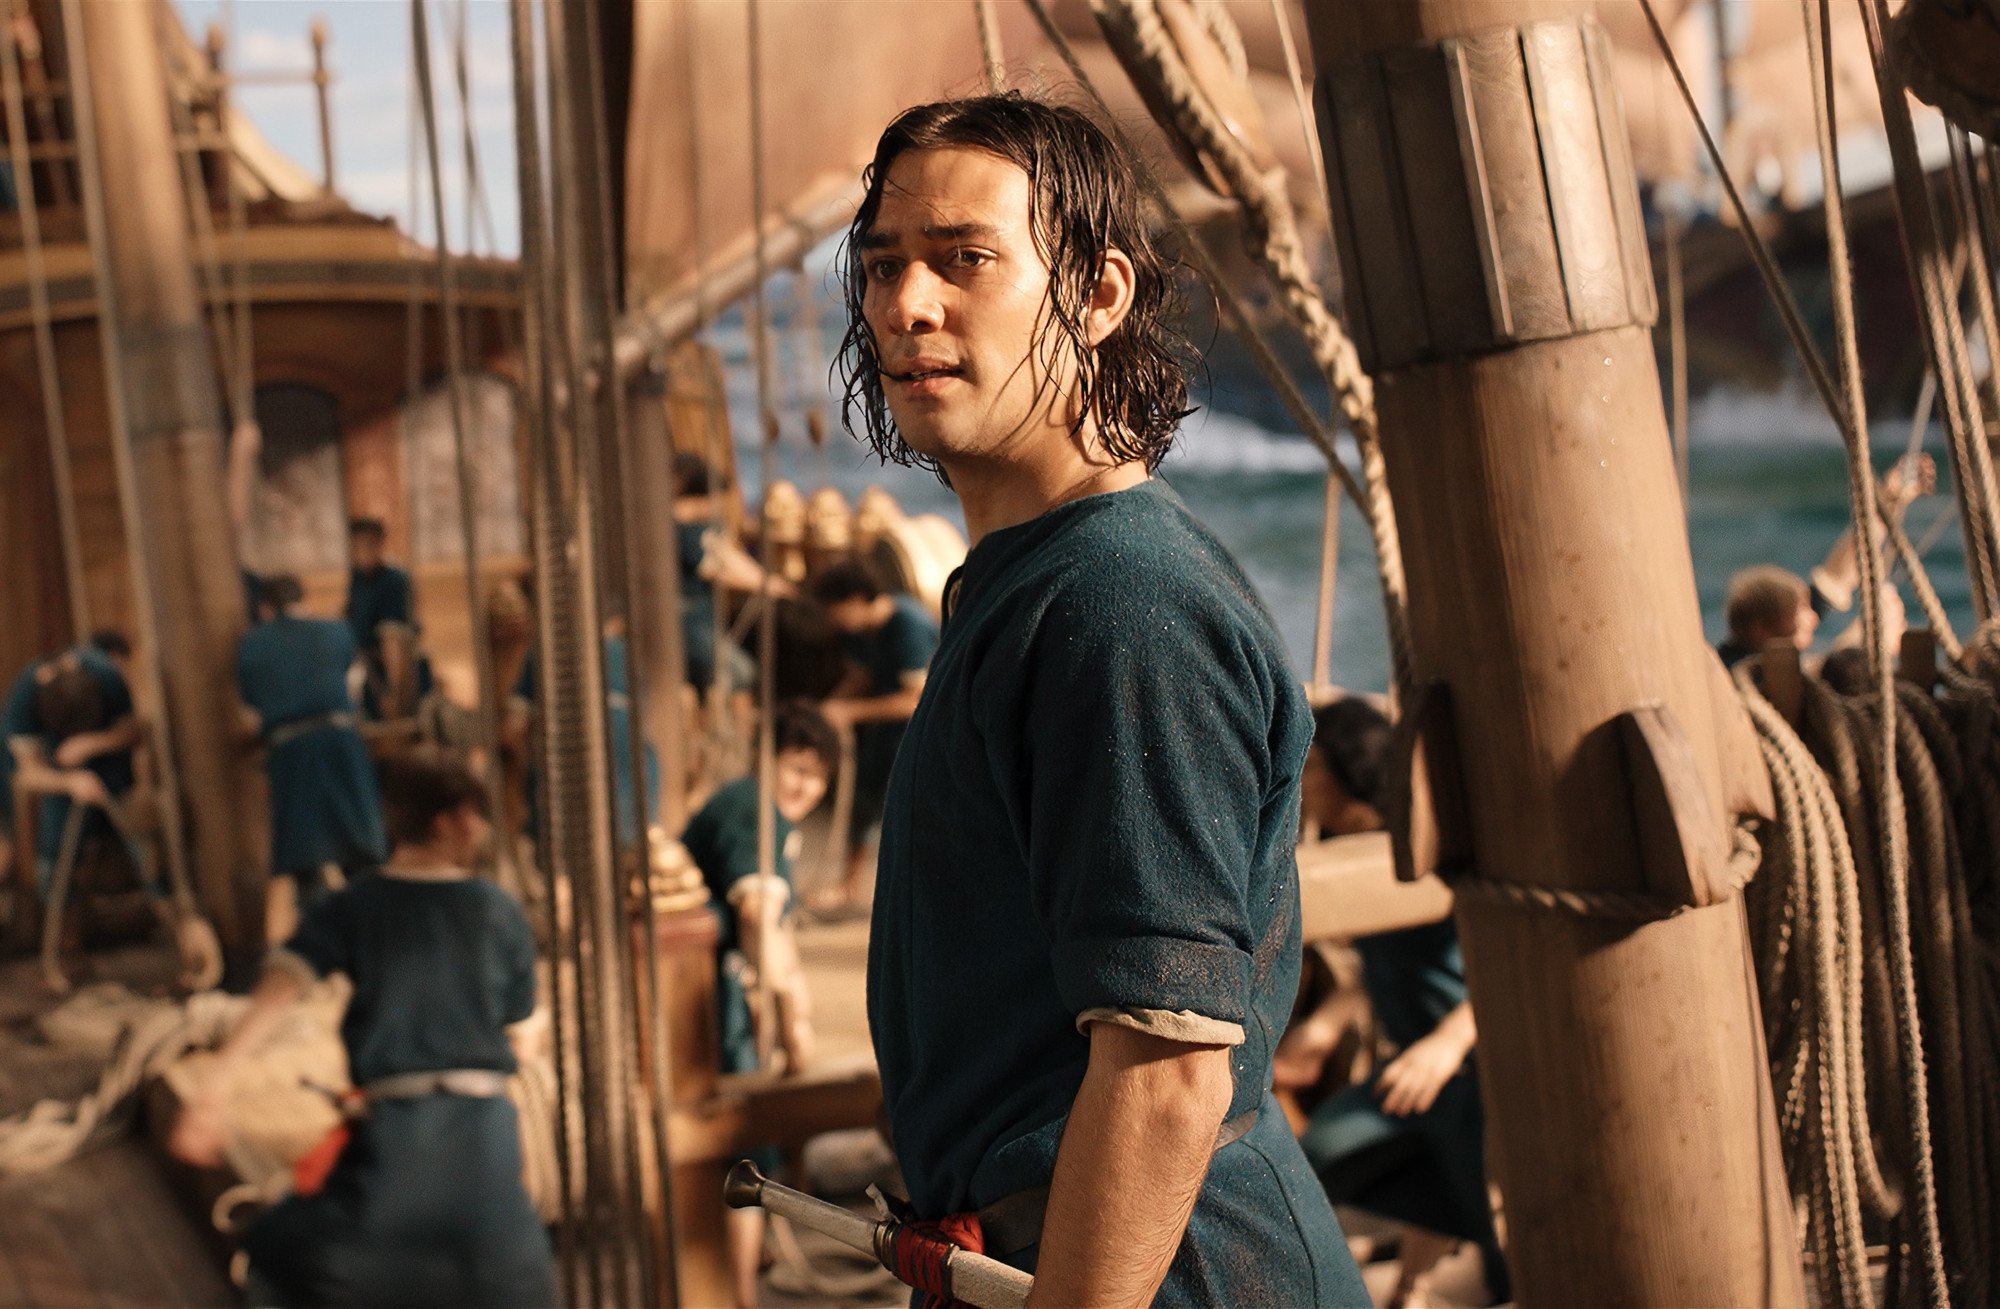 Maxim Baldry as Isildur in 'The Lord of the Rings: The Rings of Power.' He's wearing a blue shirt and standing aboard a ship.